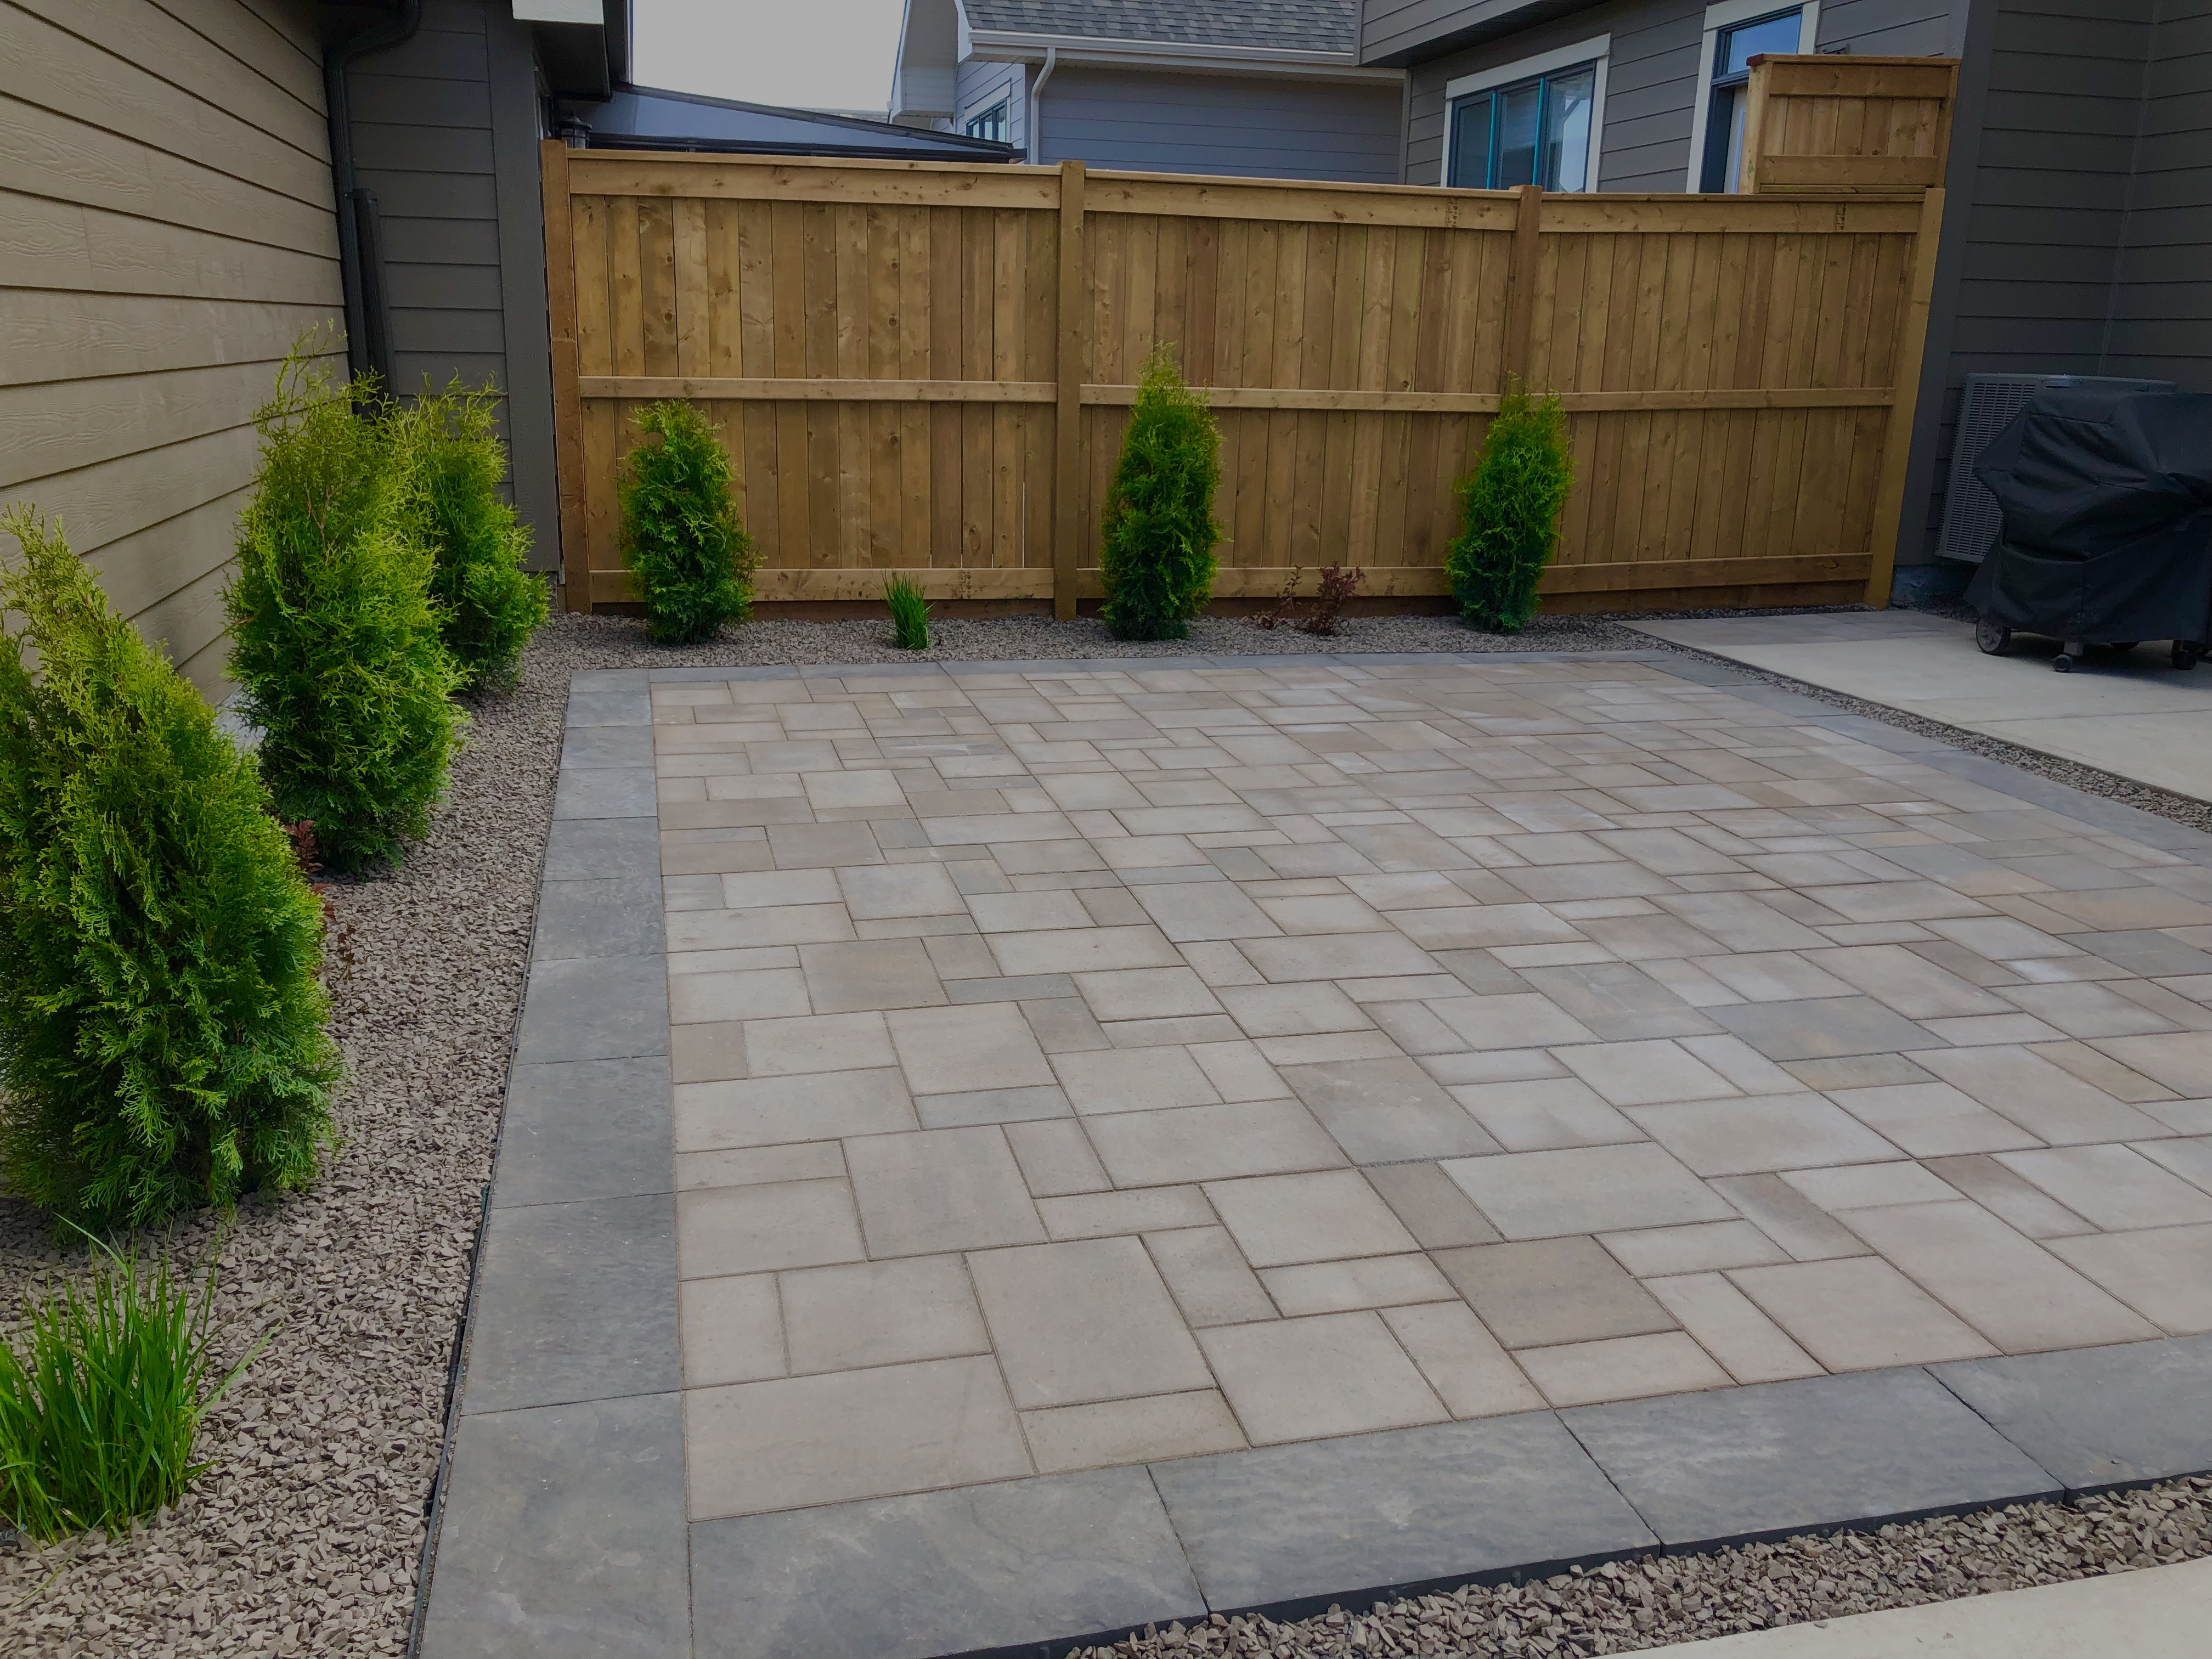 Redidential Landscaping Services in Calgary and Surrounding Area